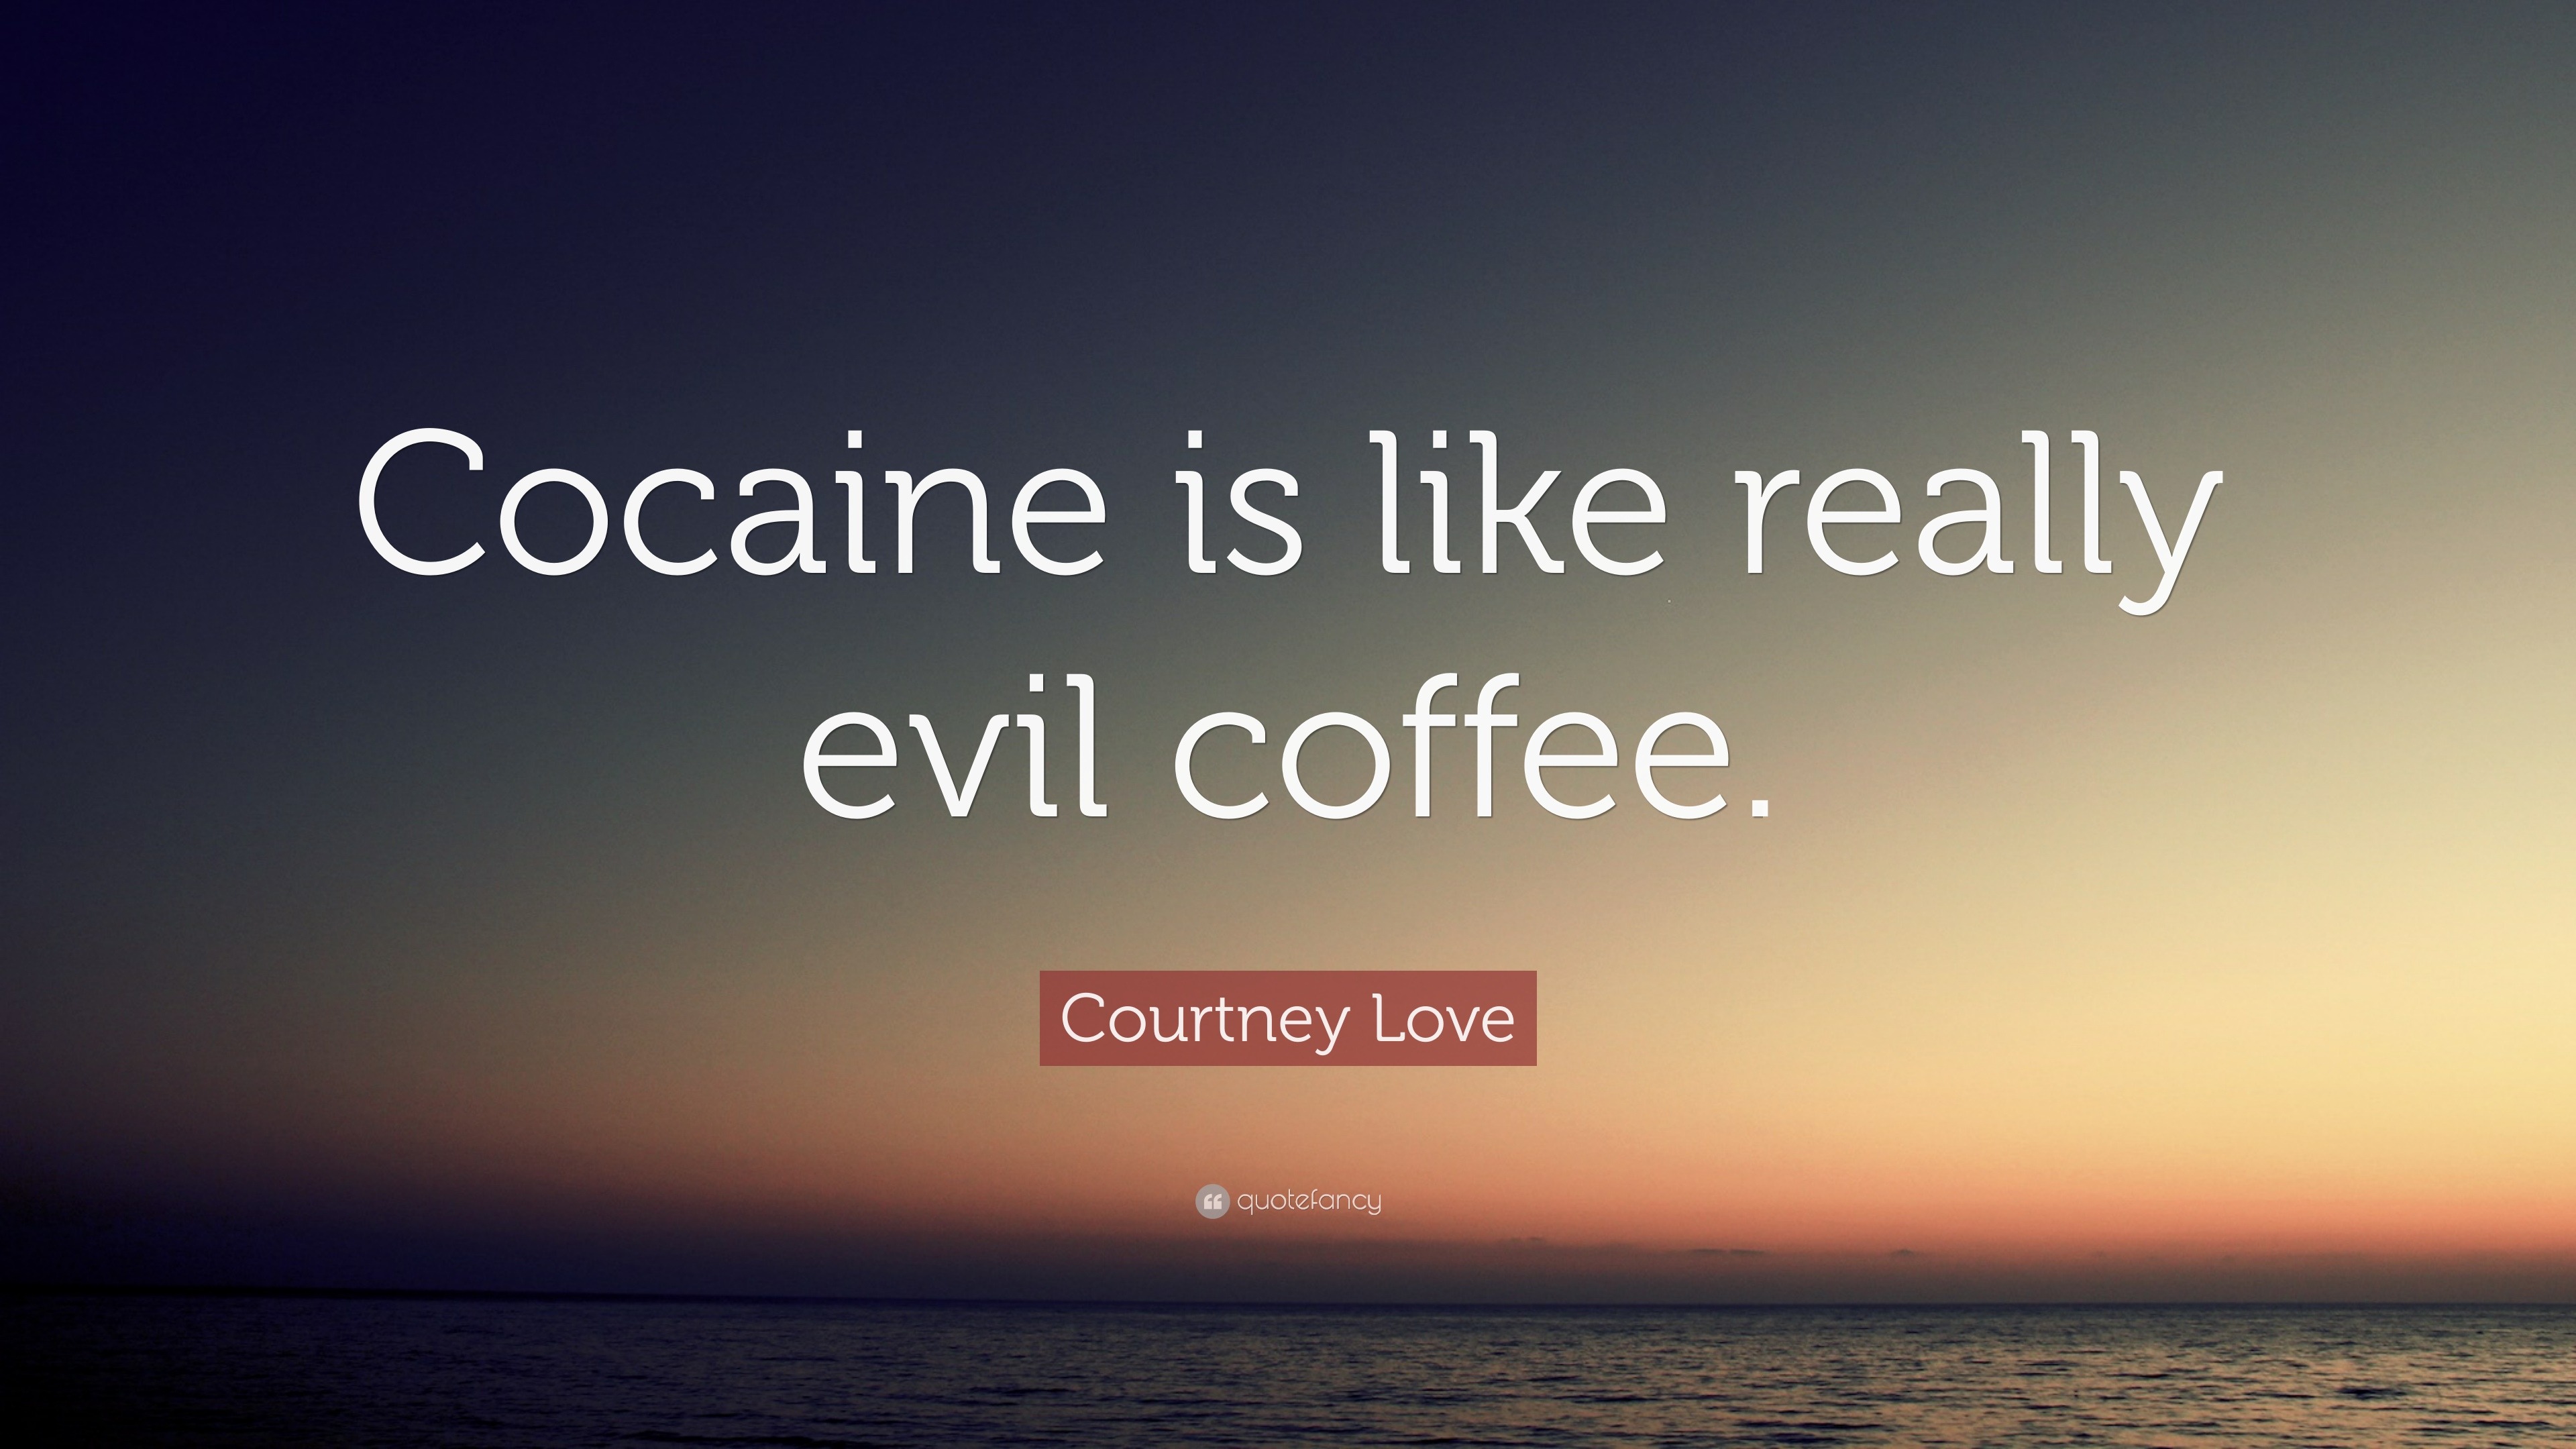 Courtney Love Quote “Cocaine is like really evil coffee ”